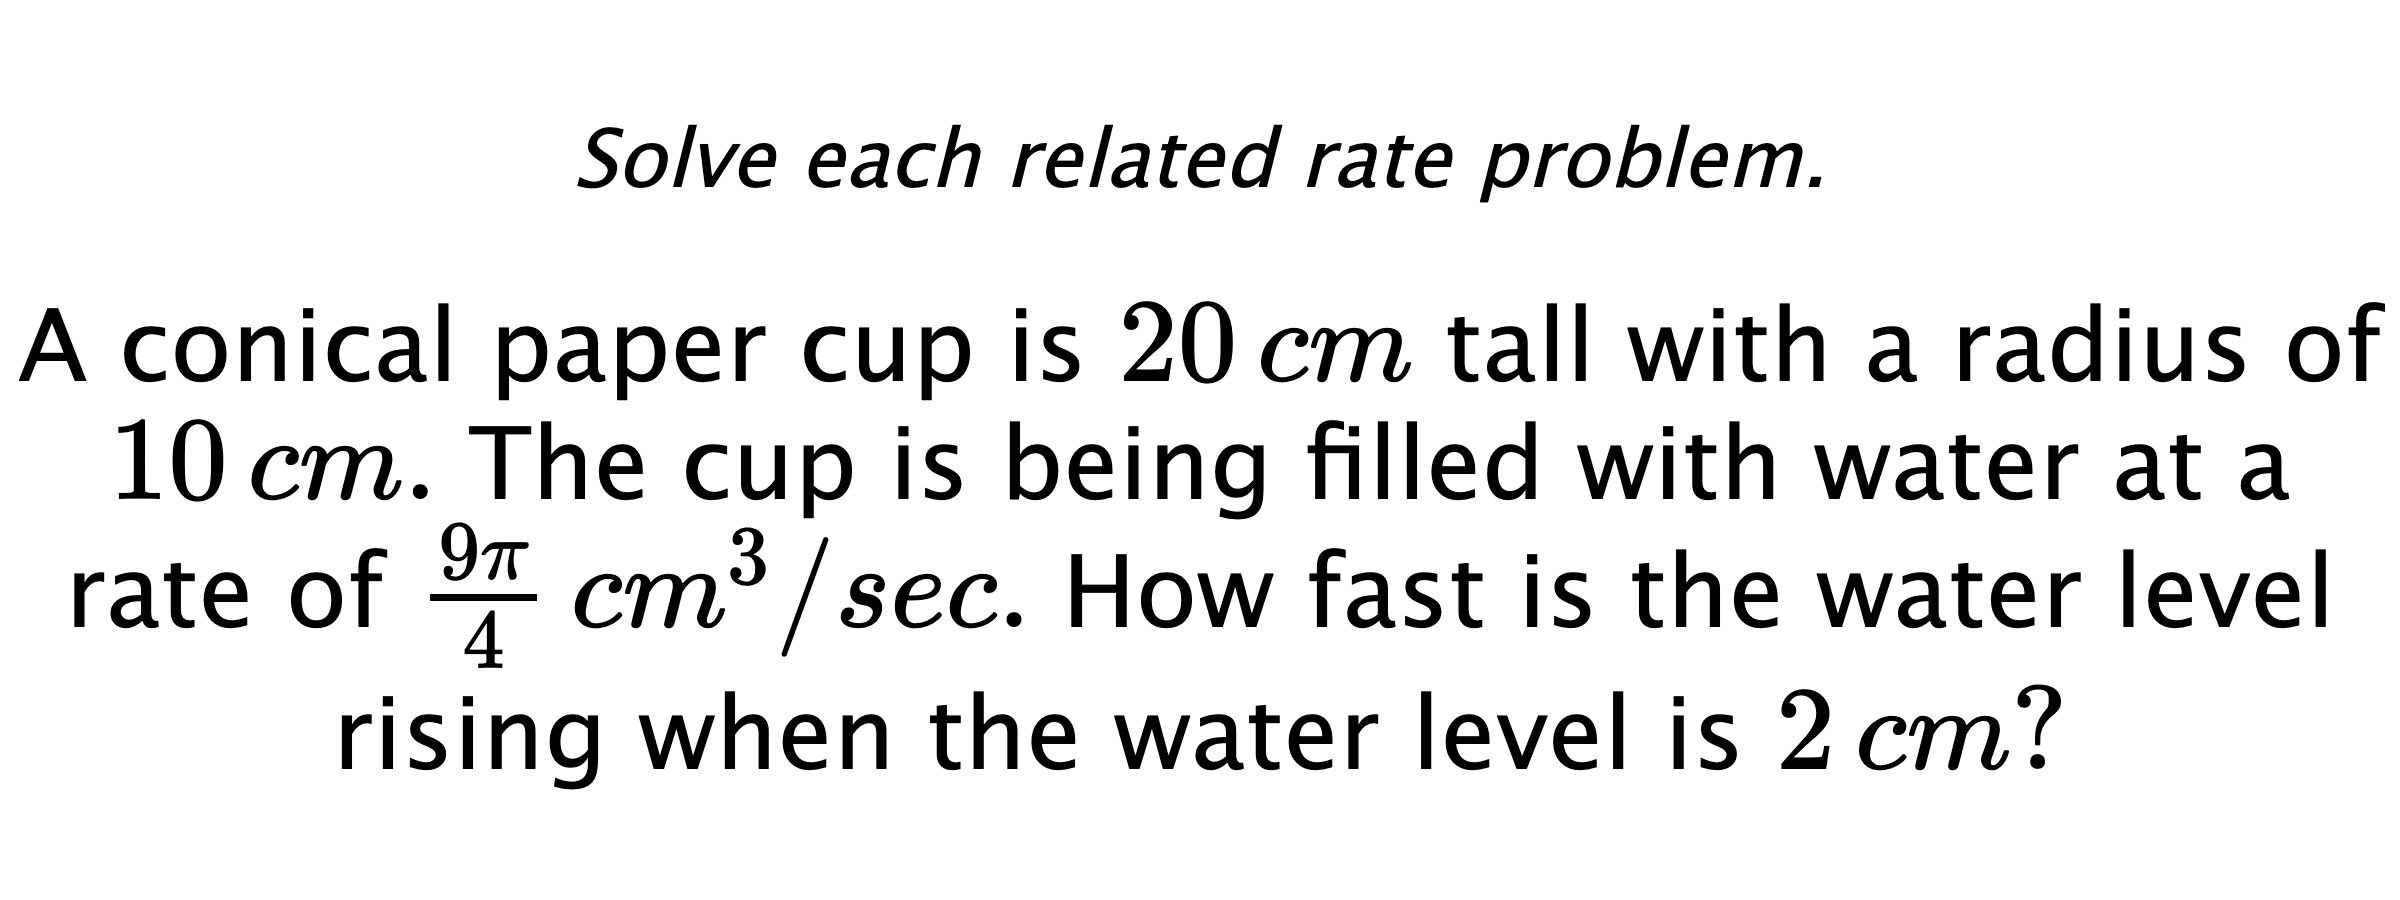 Solve each related rate problem. A conical paper cup is $20\,cm$ tall with a radius of $10\,cm.$ The cup is being filled with water at a rate of $\frac{9\pi}{4} \,cm^{3}/sec.$ How fast is the water level rising when the water level is $2\,cm?$